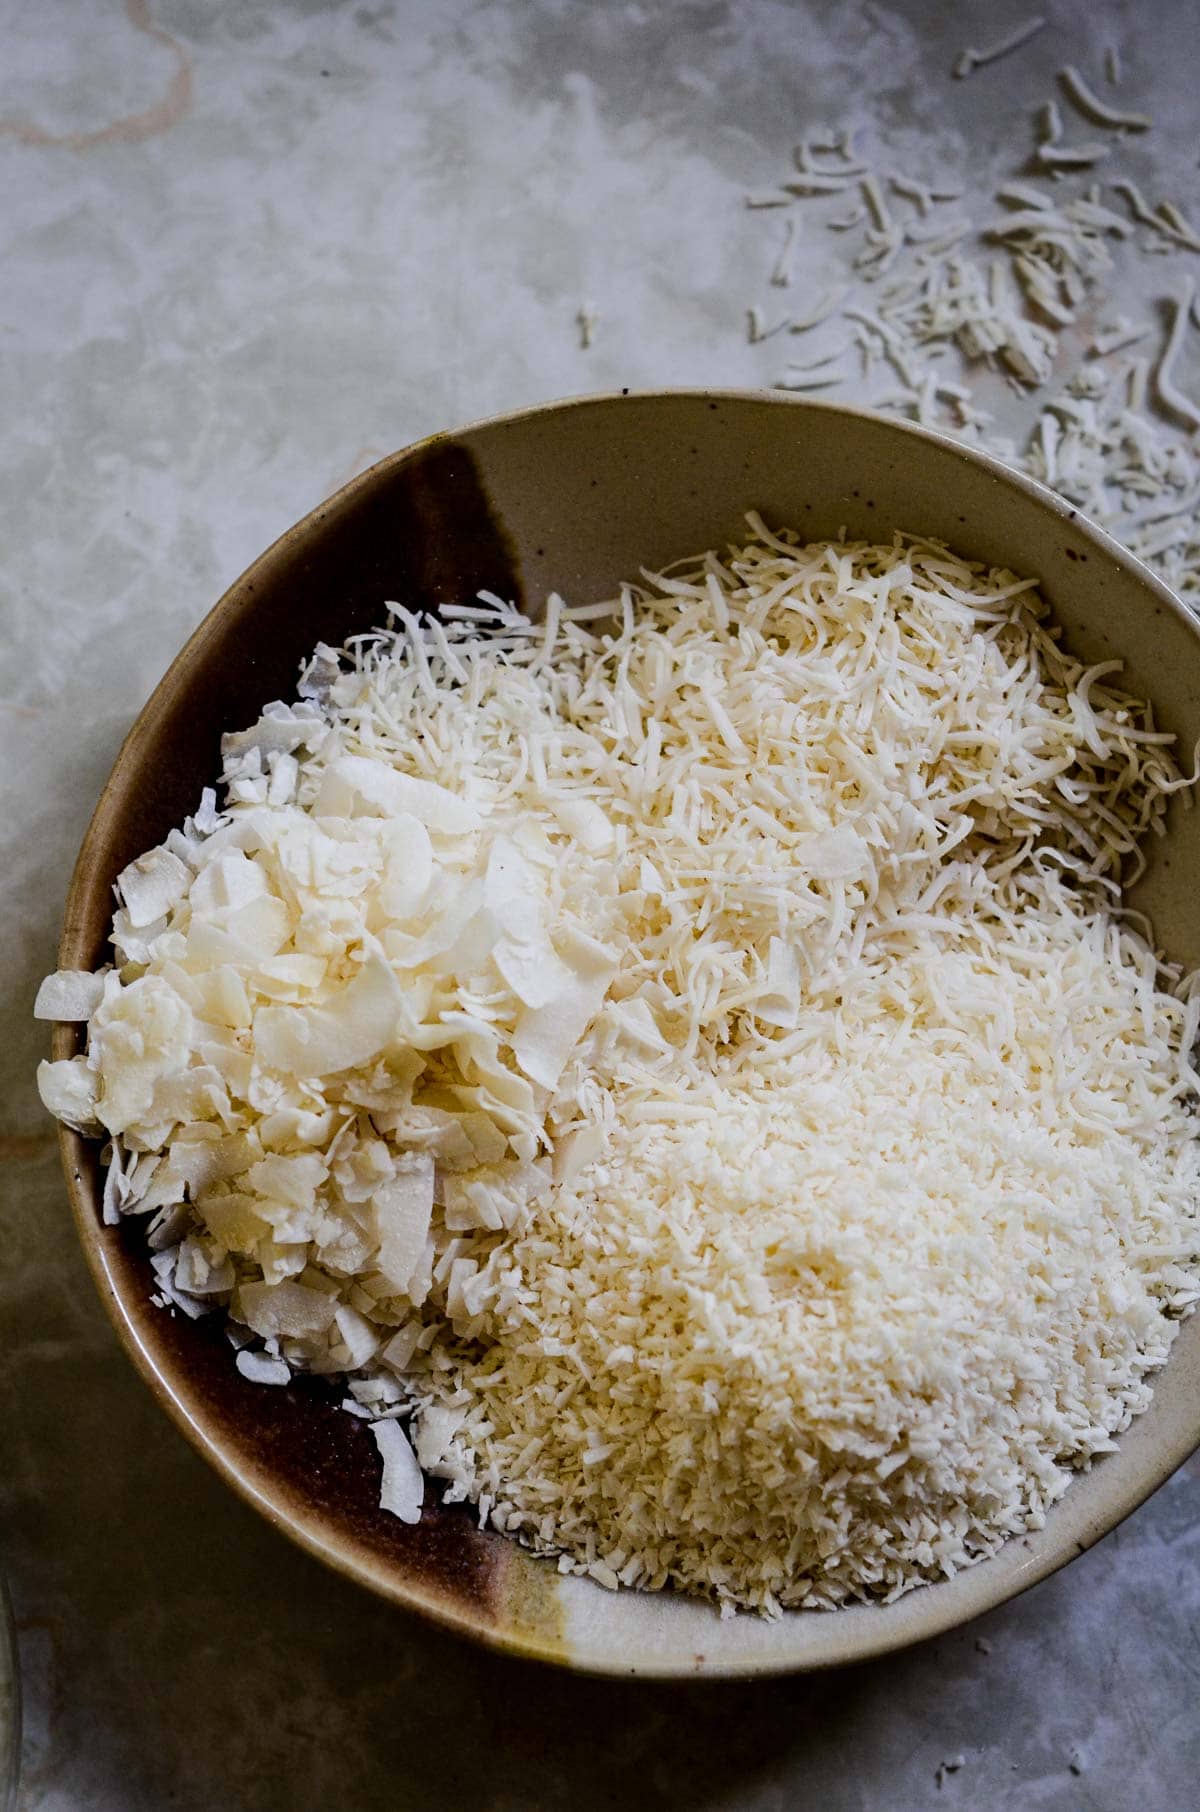 Shredded coconut, flaked coconut, and desiccated coconut in a bowl.